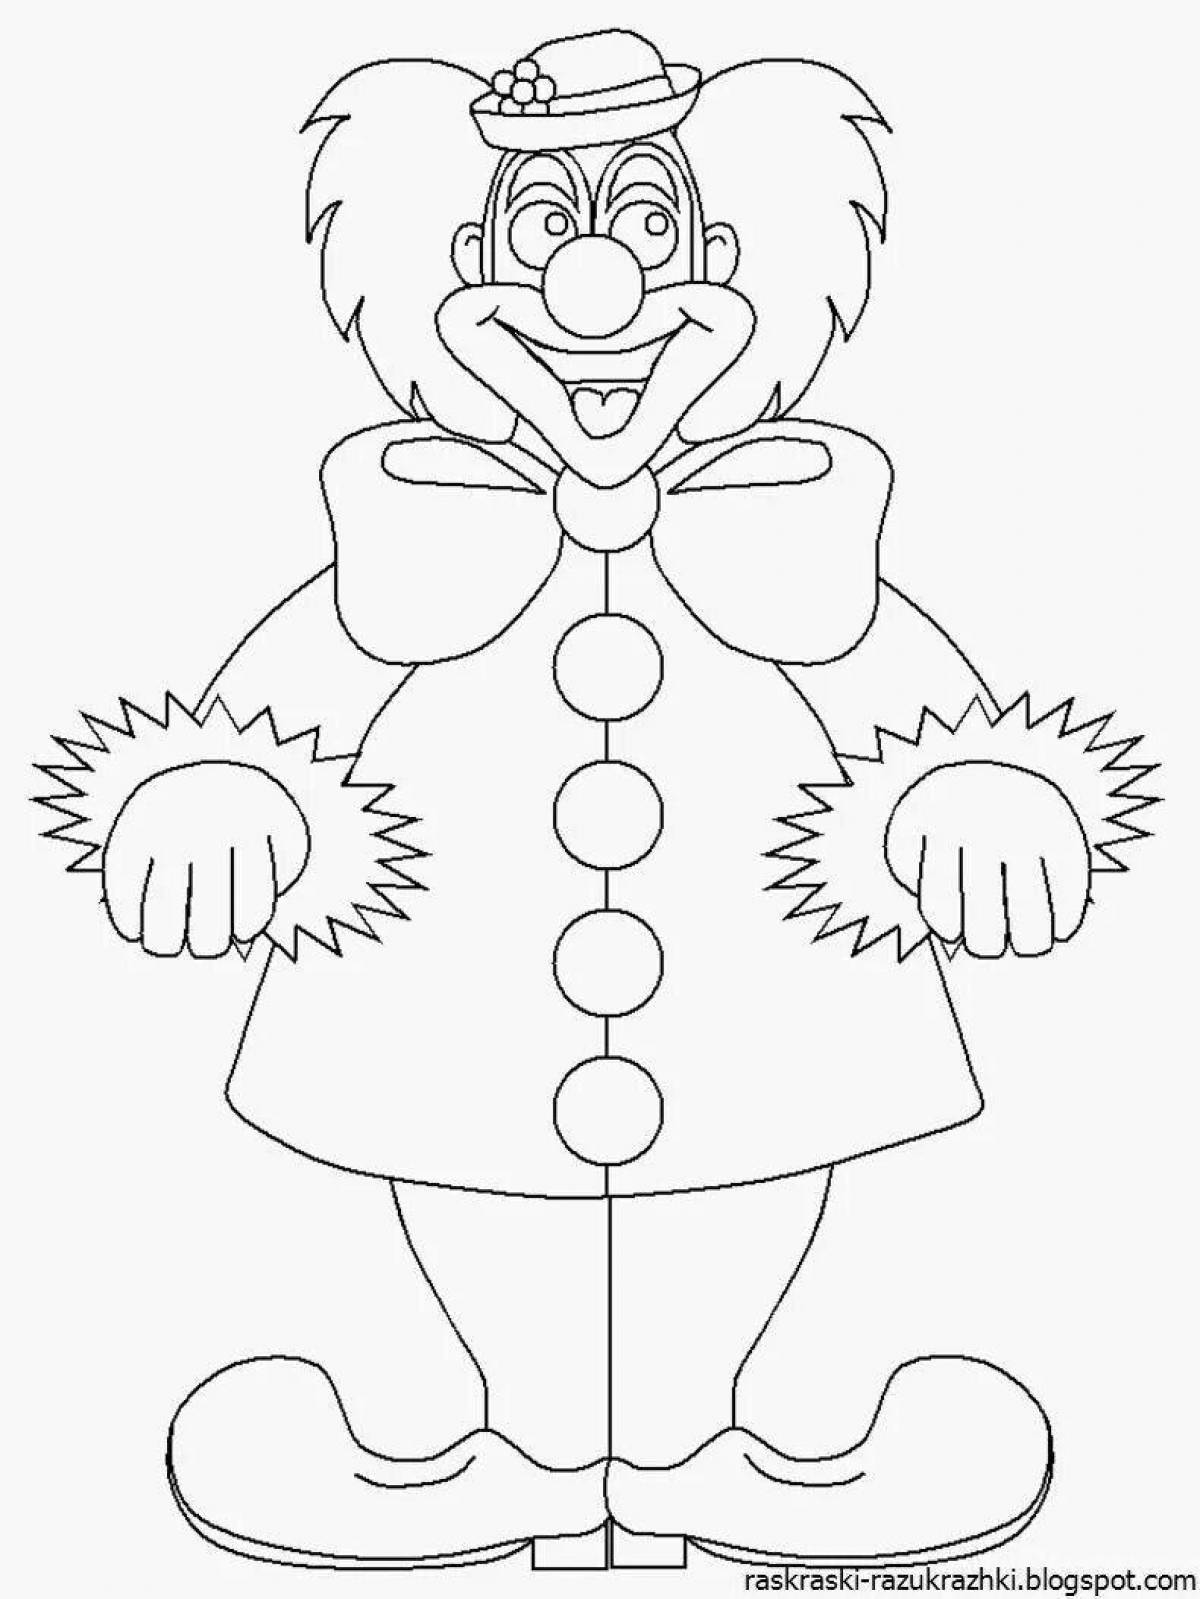 Colorful clown coloring for kids